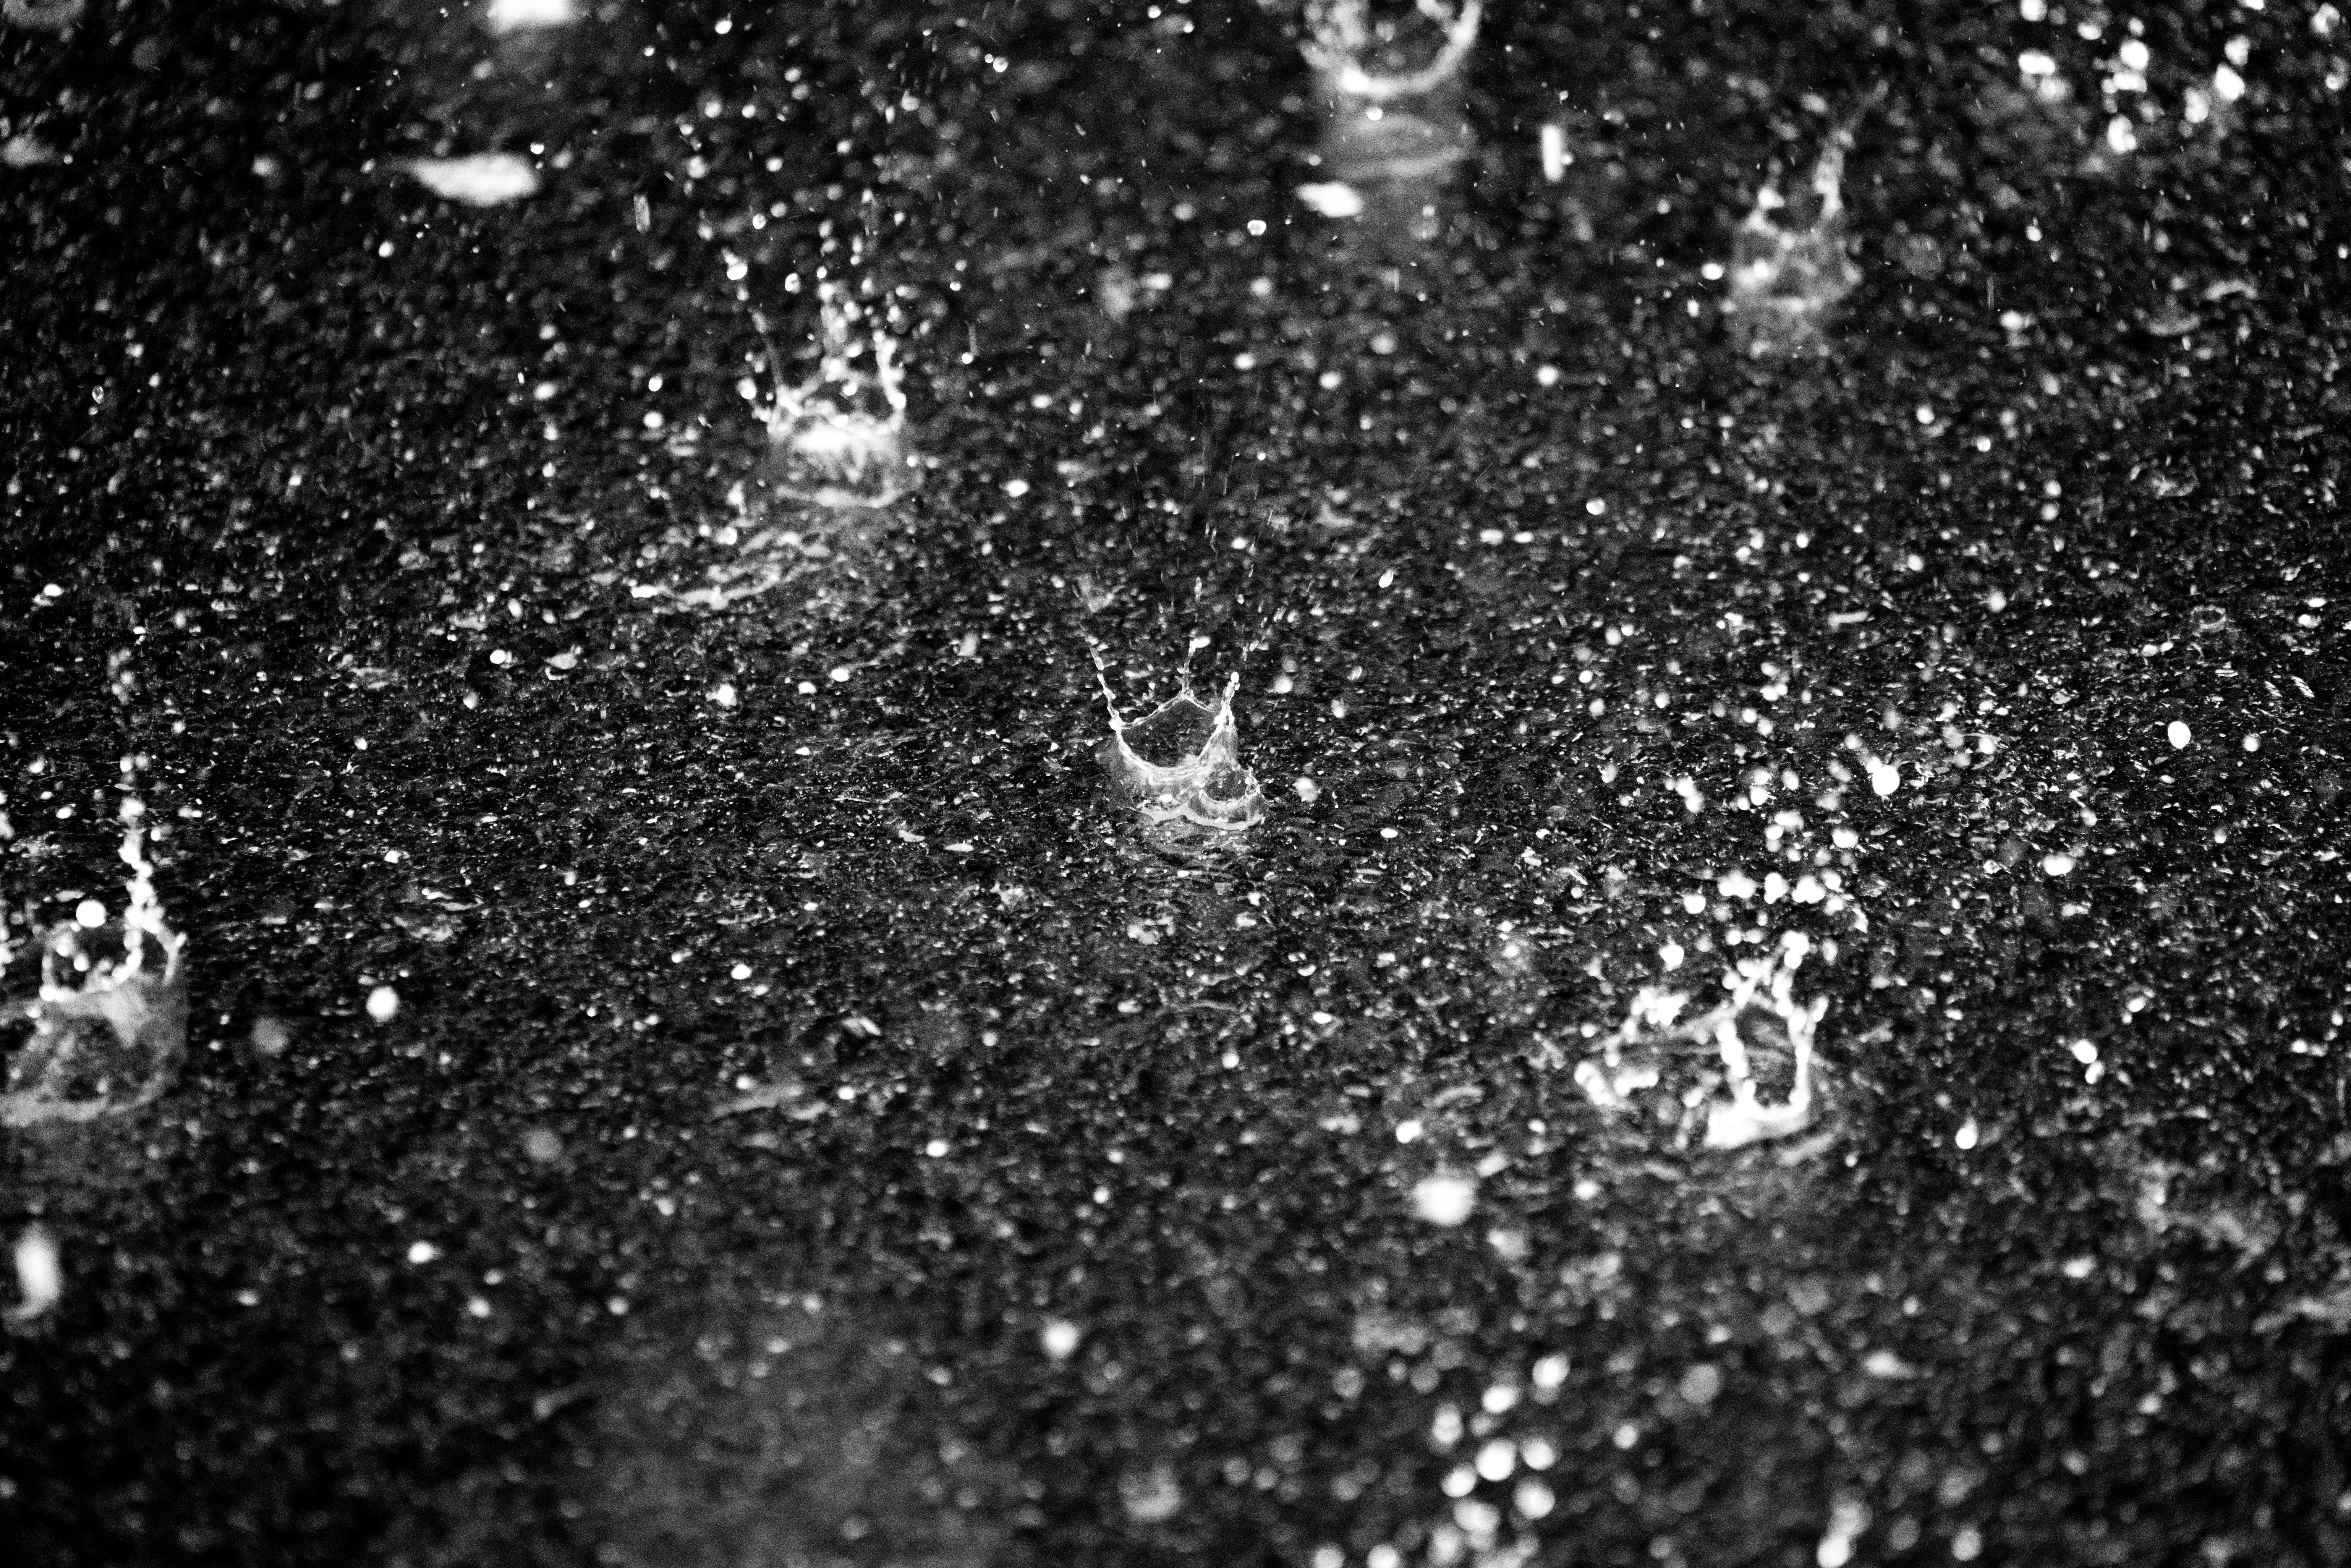 Free Images : sand, drop, liquid, black and white, texture, rain, leaf,  fresh, soil, surface tension, monochrome, material, circle, close up,  rainy, droplets, raindrops, macro photography, water drops 5456x3632 - -  1238781 